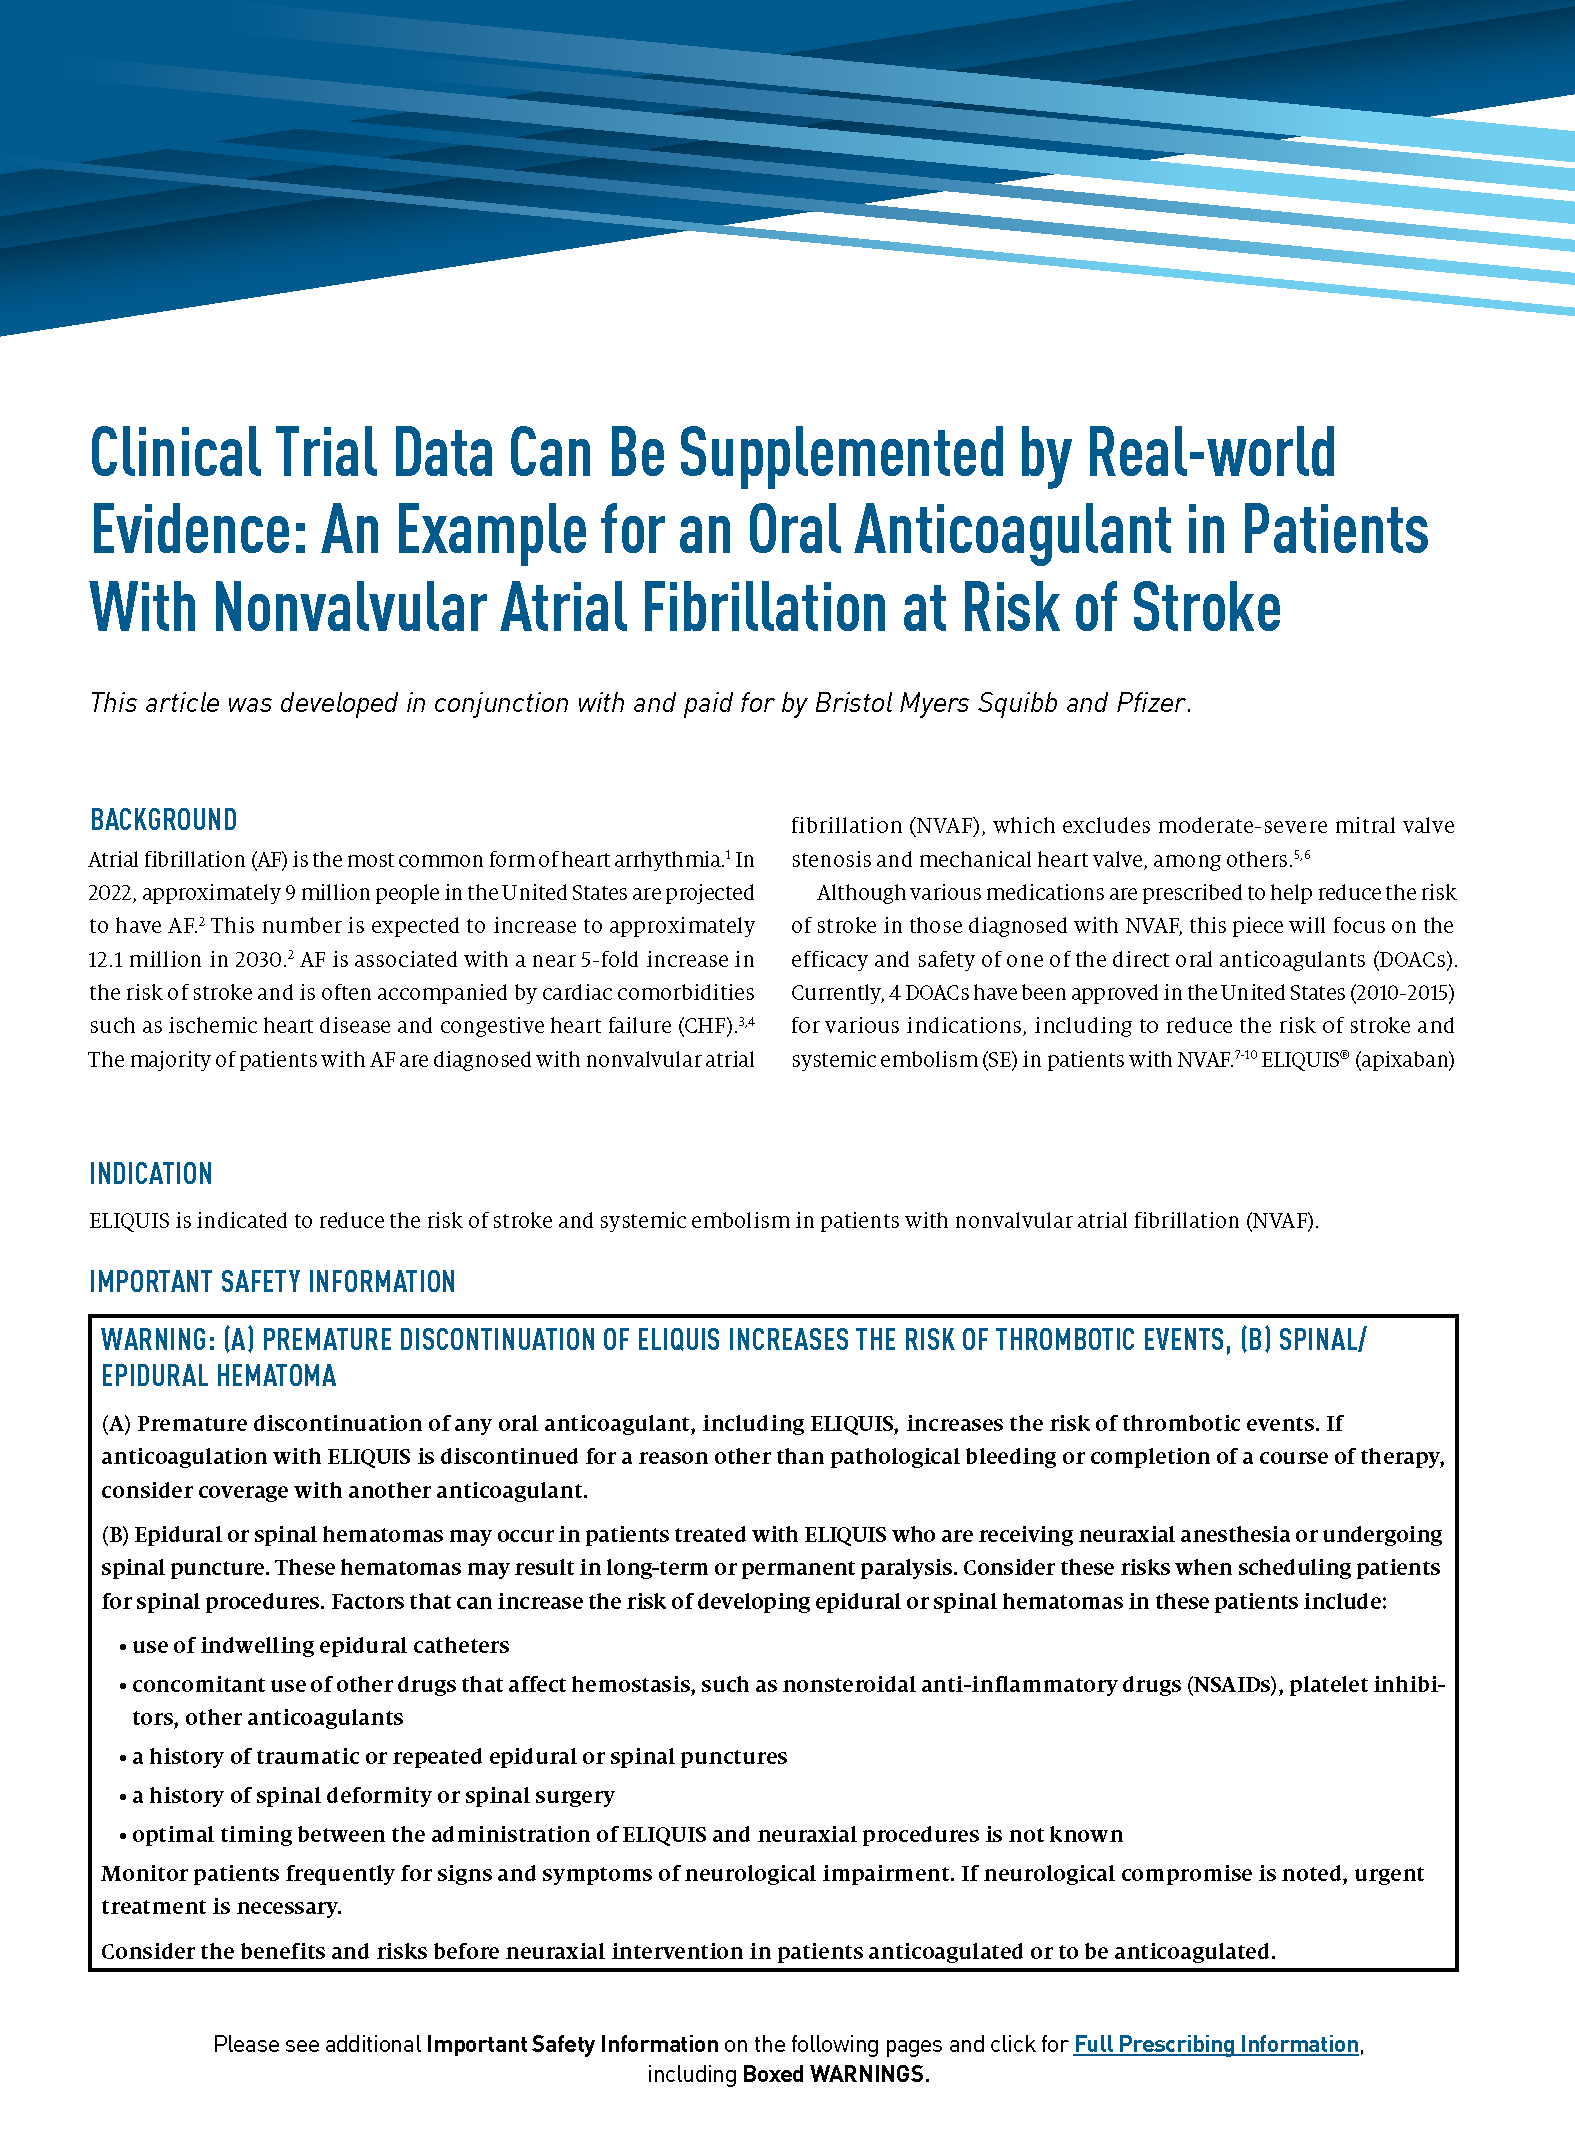 Clinical Trial Data Can Be Supplemented by Real-World Evidence: An Example for an Oral Anticoagulant in Patients With Nonvalvular Atrial Fibrillation at Risk of Stroke